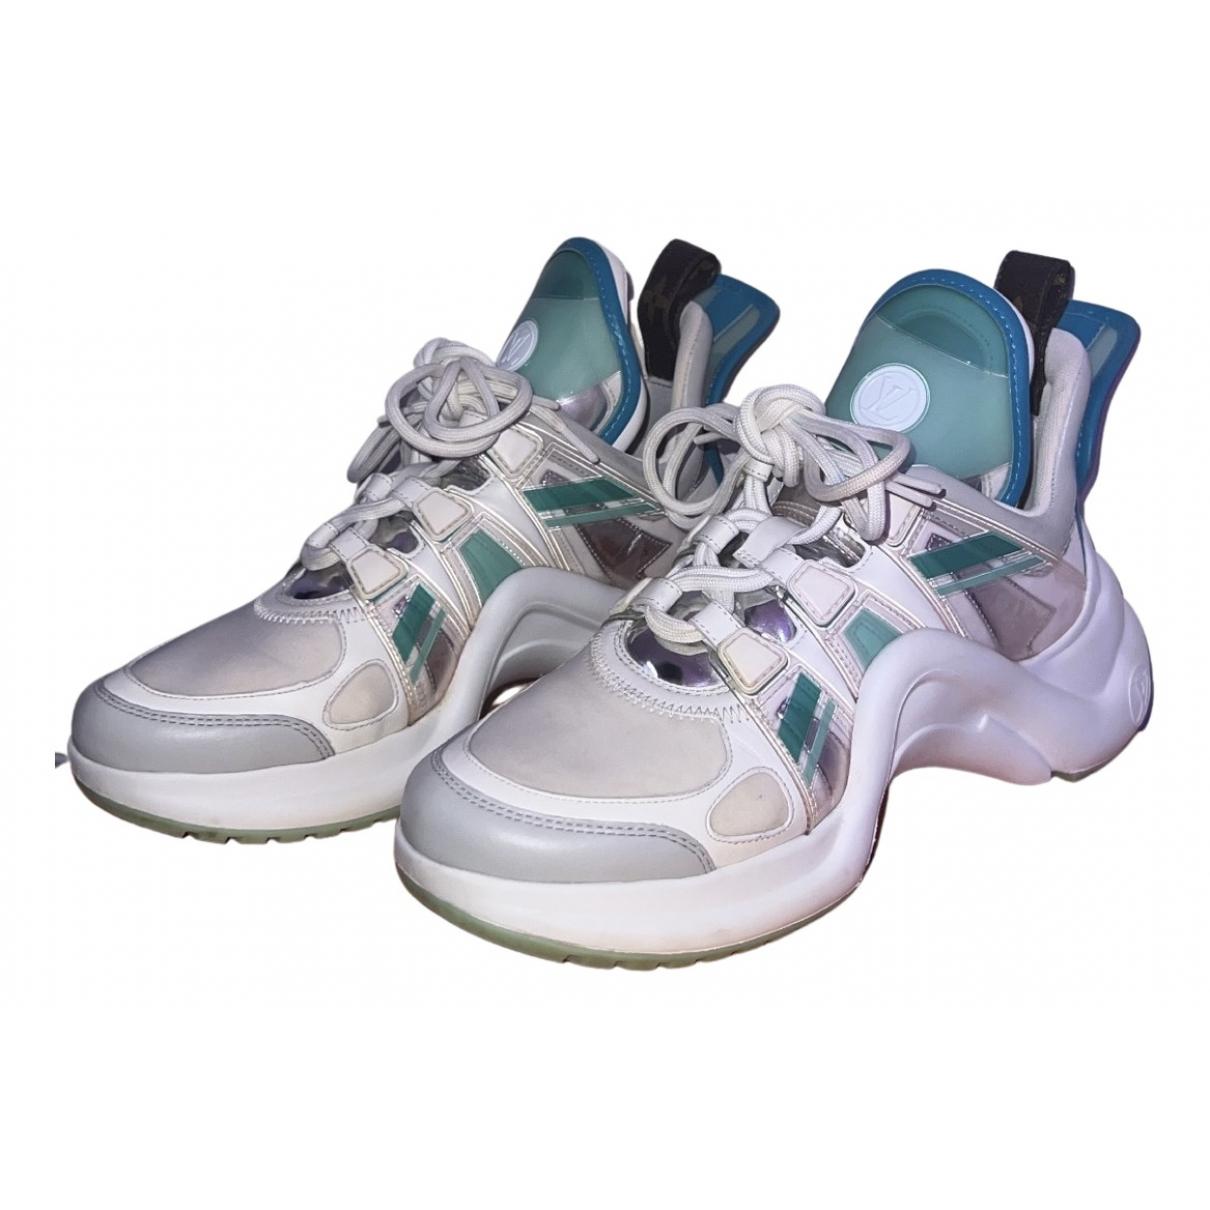 Archlight high trainers Louis Vuitton Turquoise size 38 EU in Rubber -  35988201